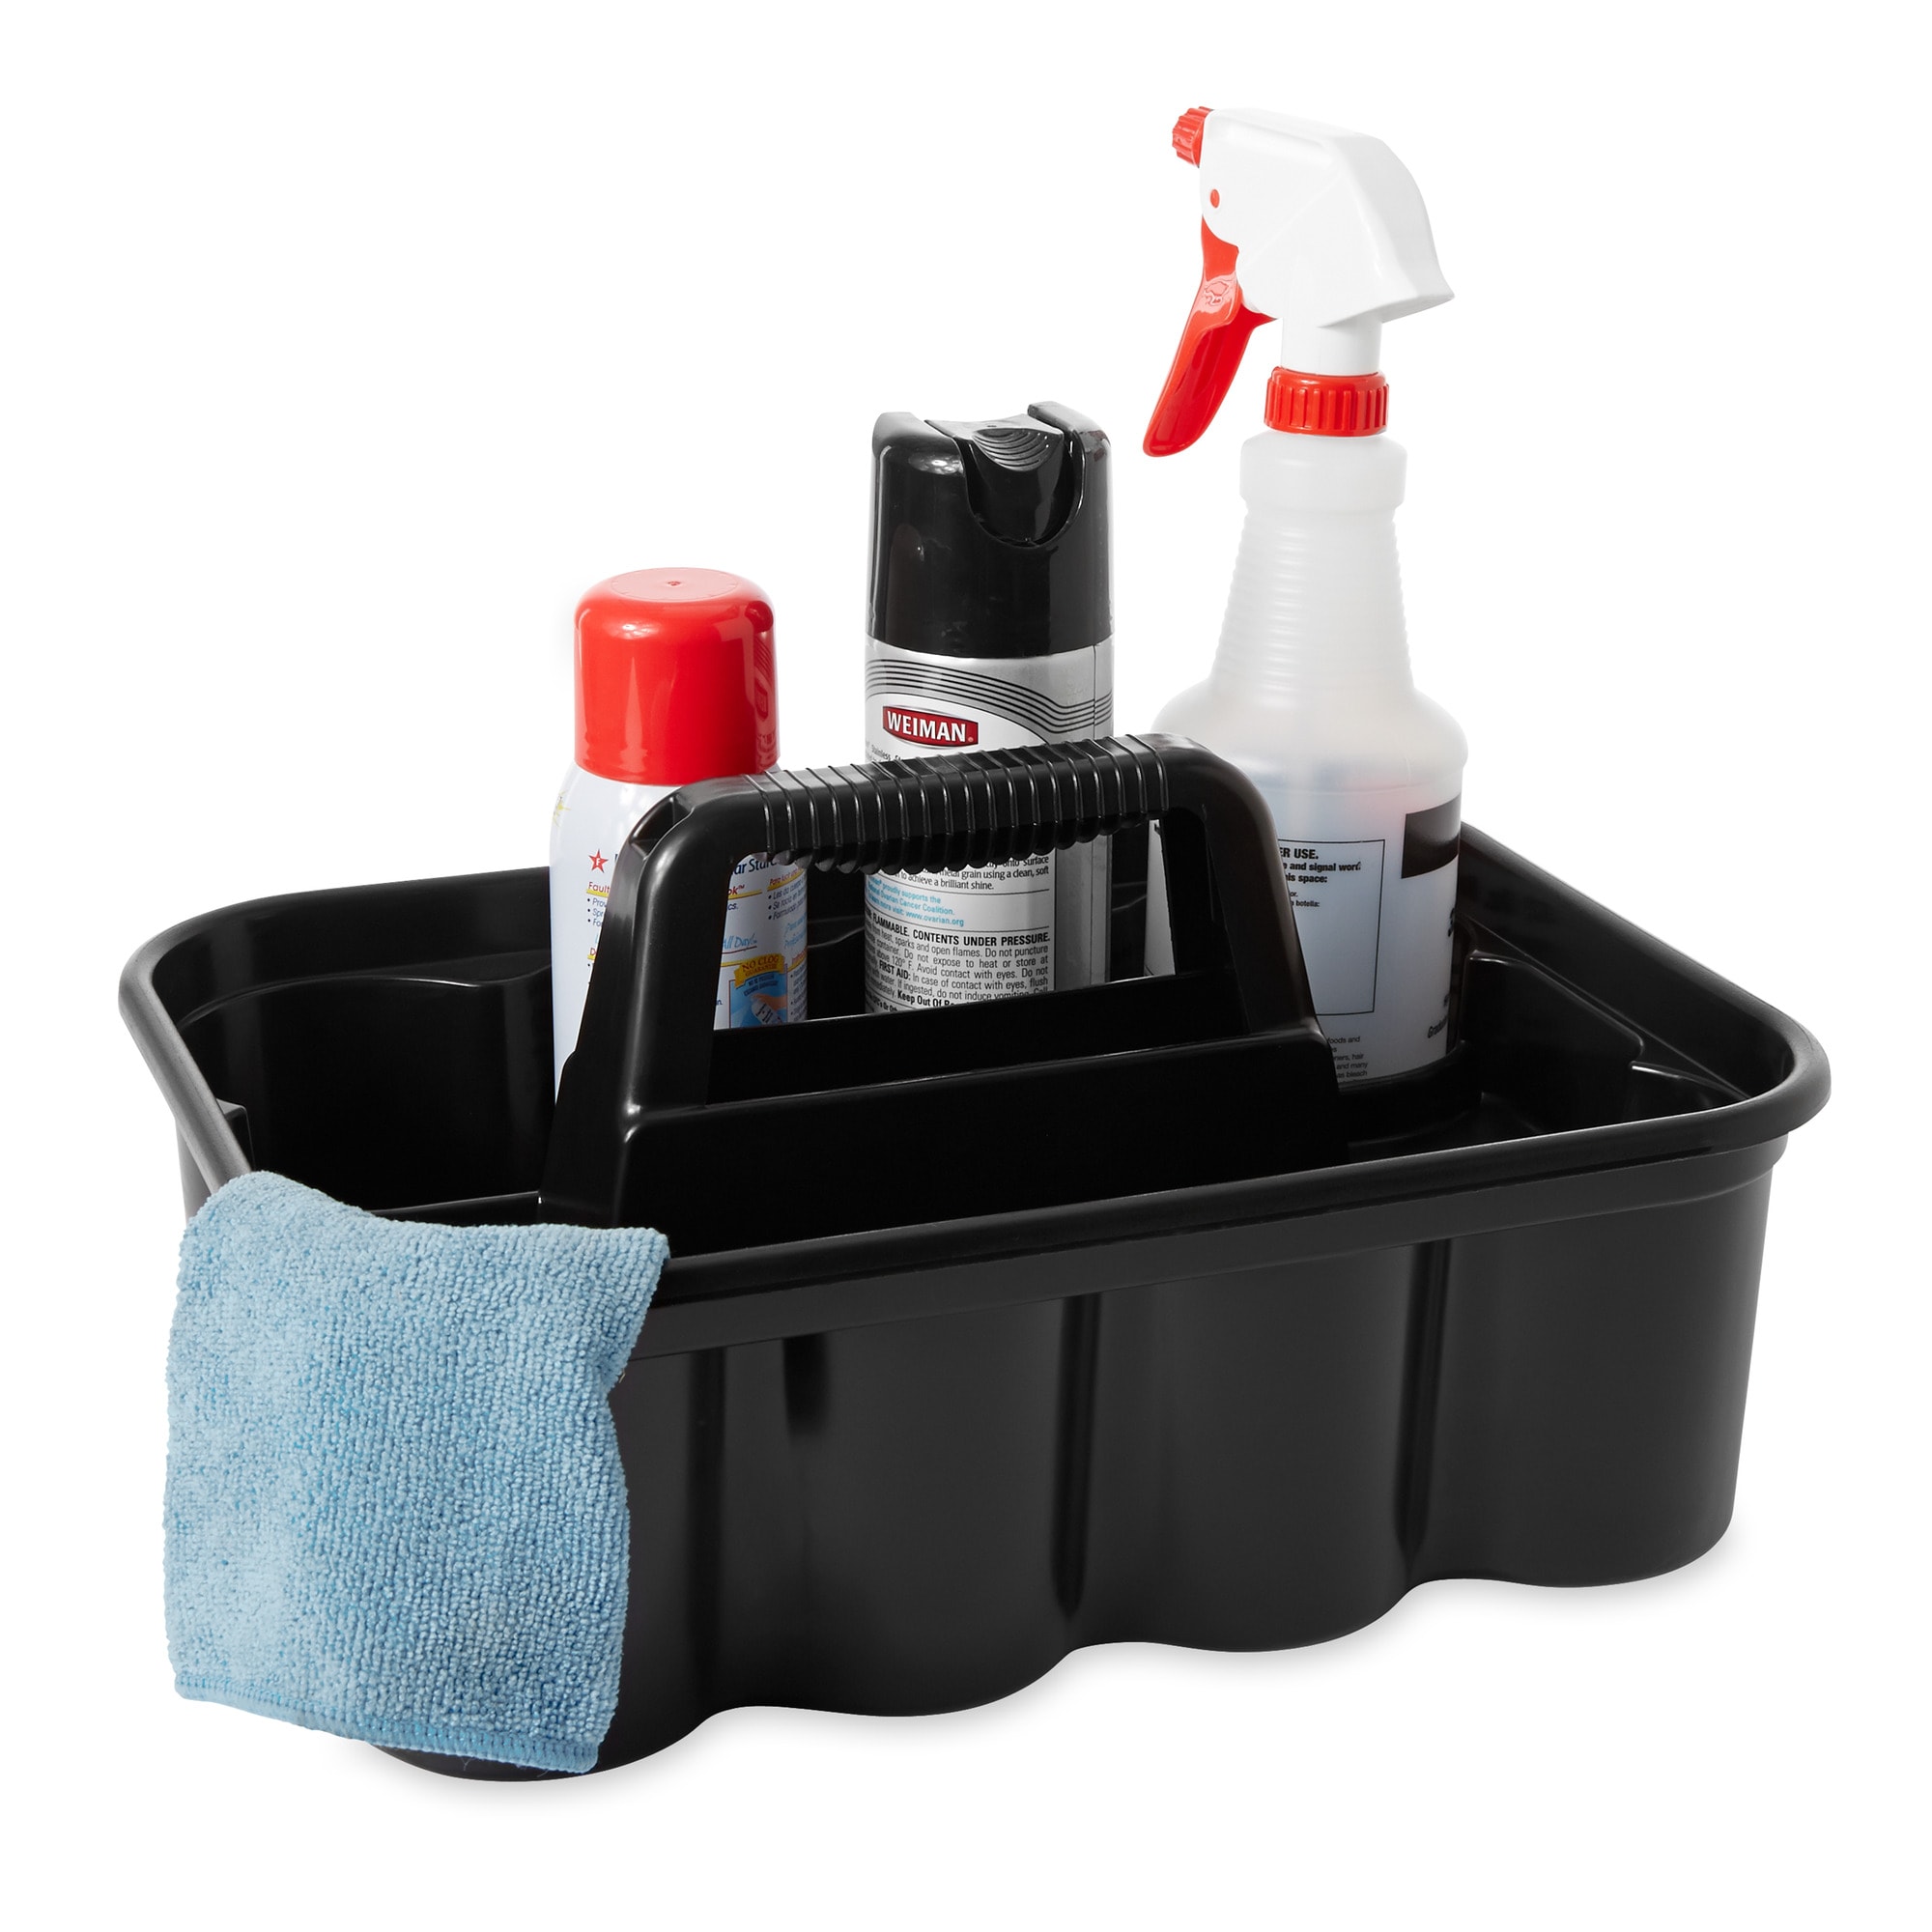 The 20 Best Cleaning Caddies of 2020, From Rubbermaid to Casabella – SPY